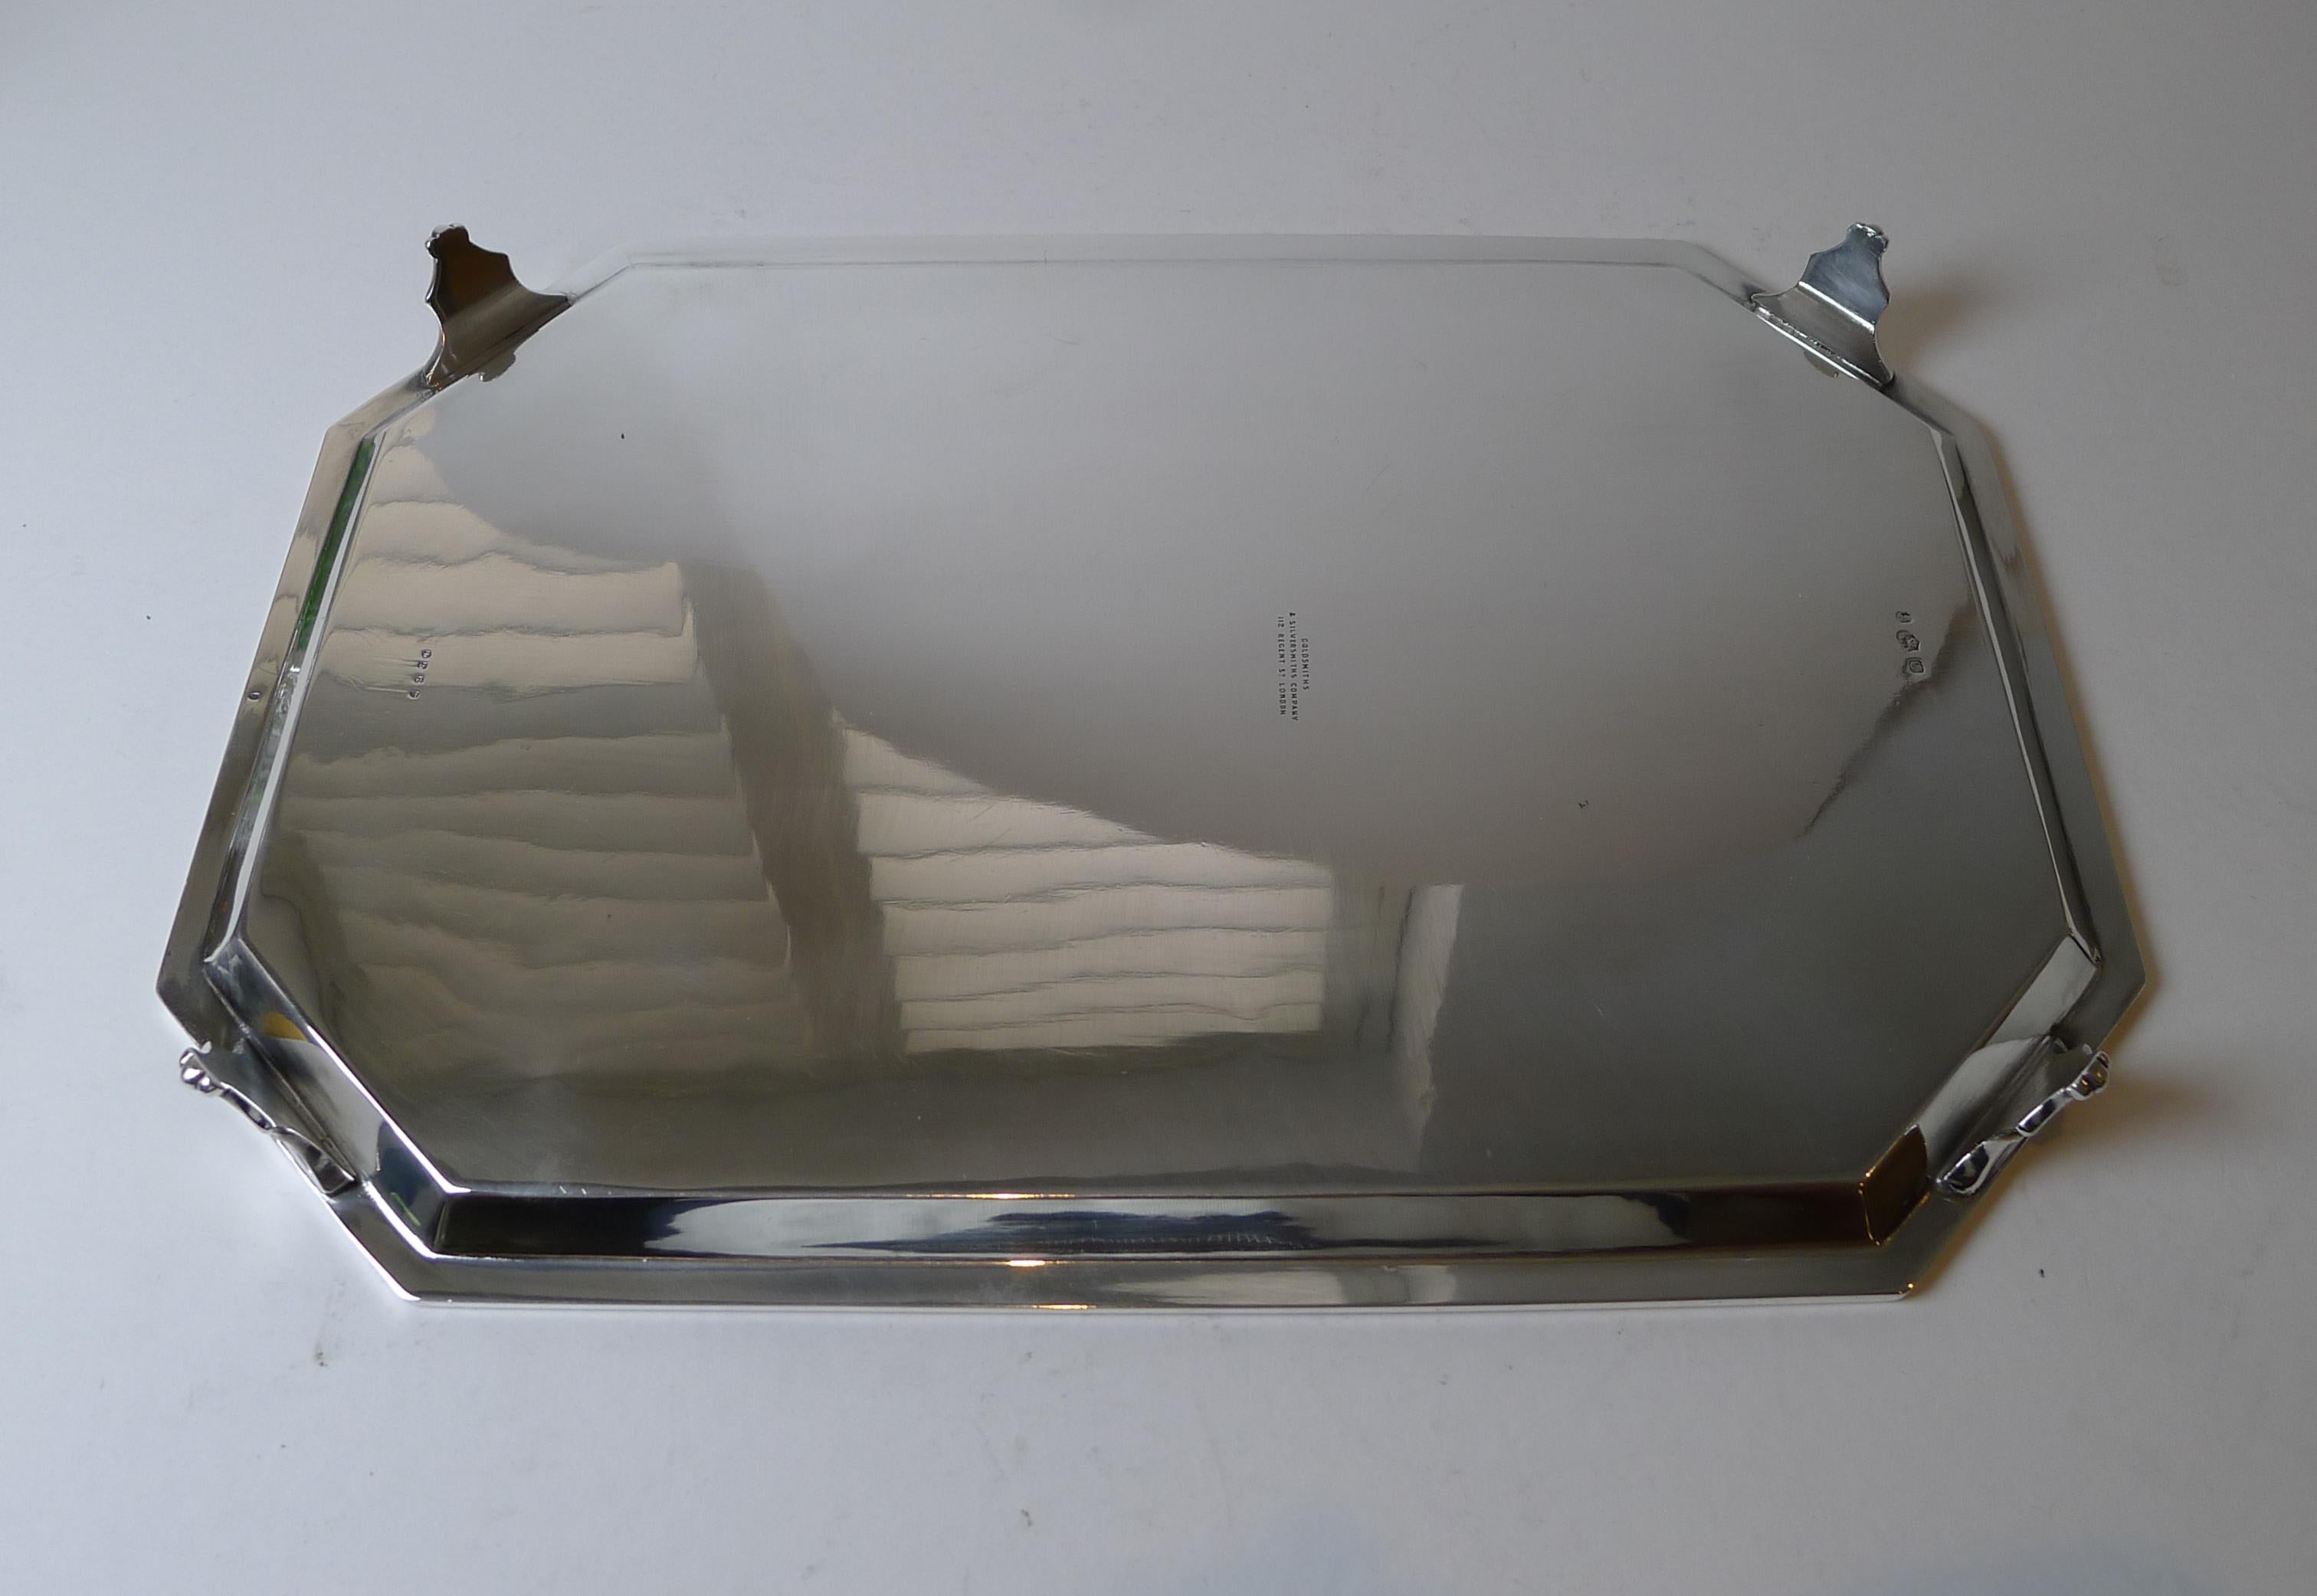 Quality Silver Plated Cocktail / Drinks Tray by Goldsmiths & Silversmiths Co. c. For Sale 1